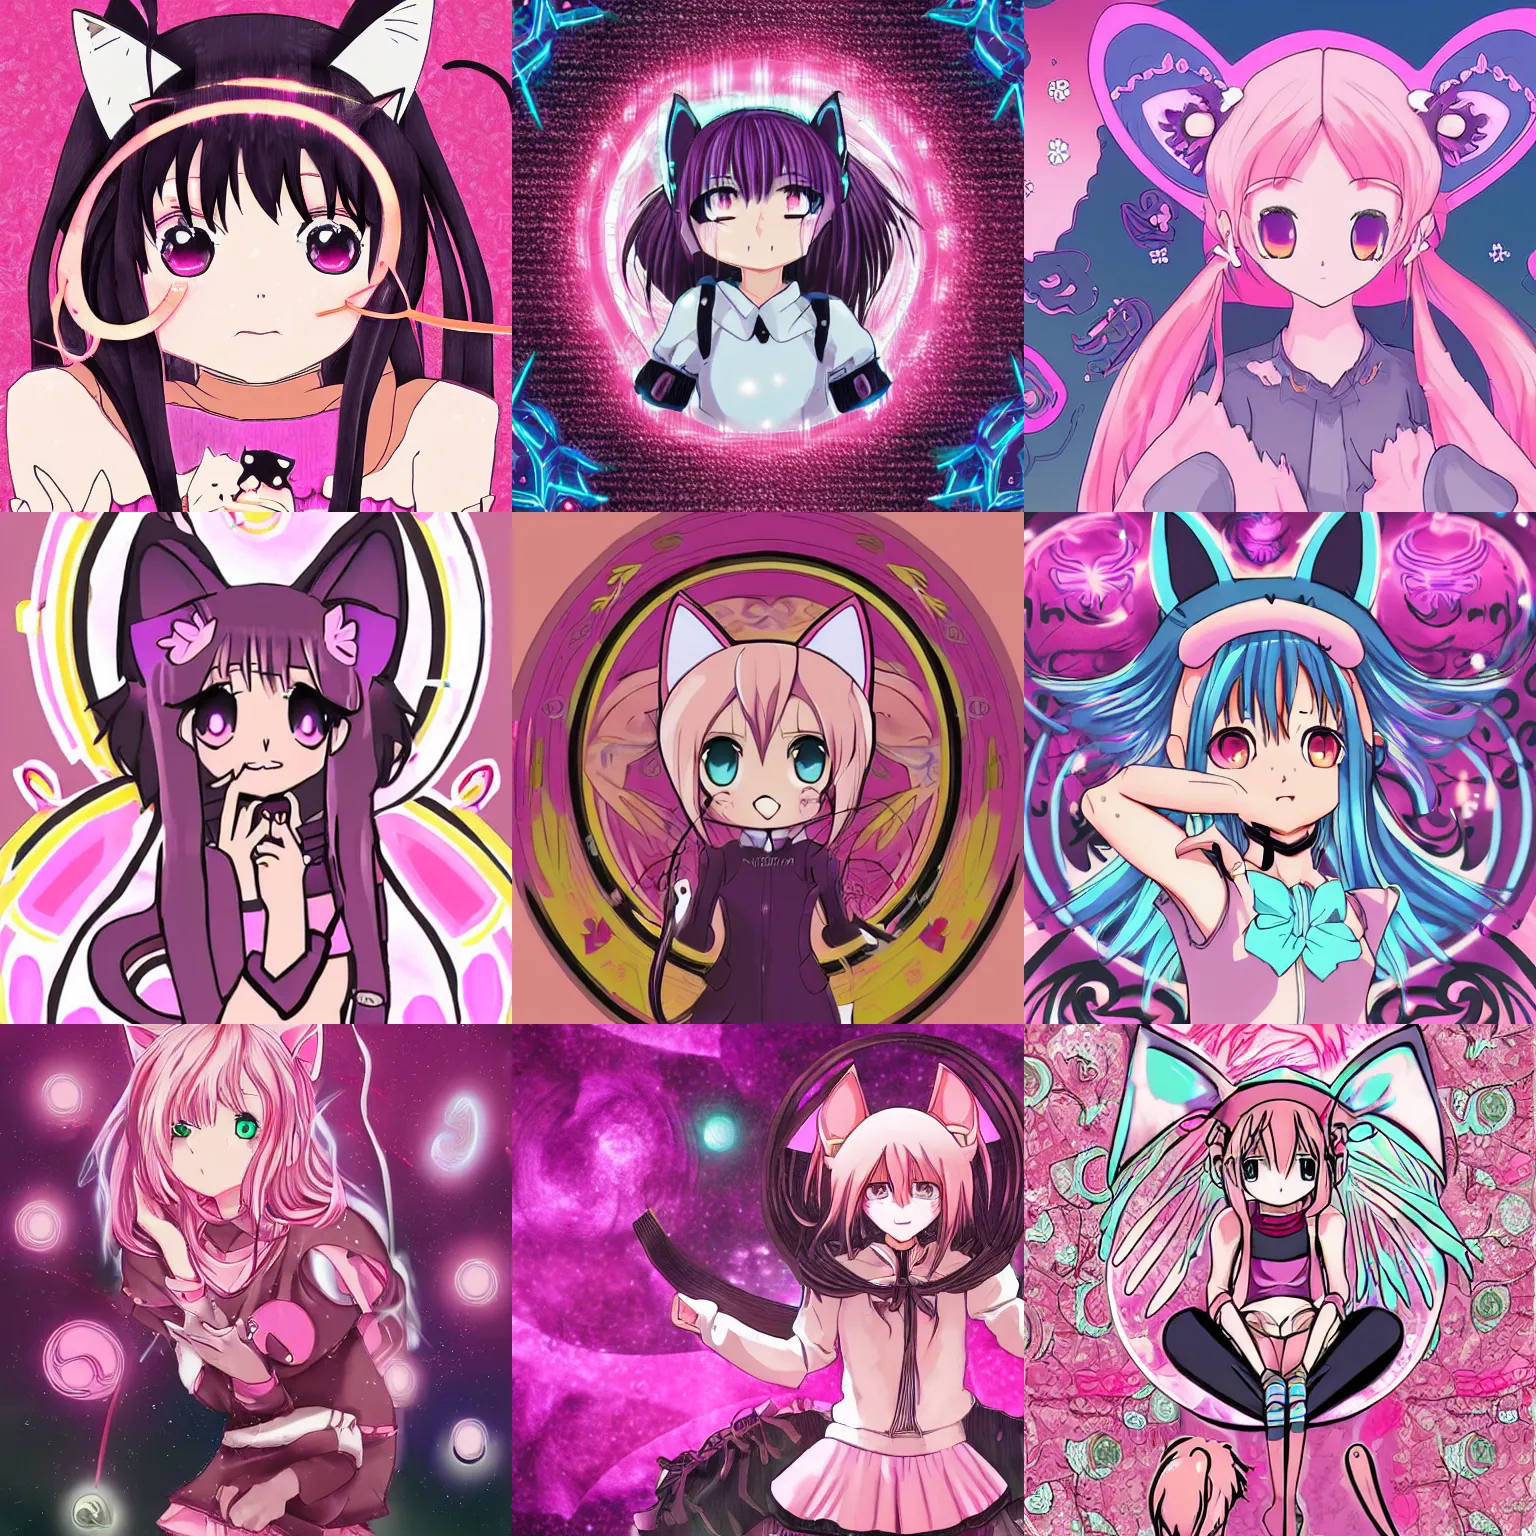 Prompt: digital card art of anime (cat) girl with cat ears surrounded by magic circles. Pink hue. Highly detailed.